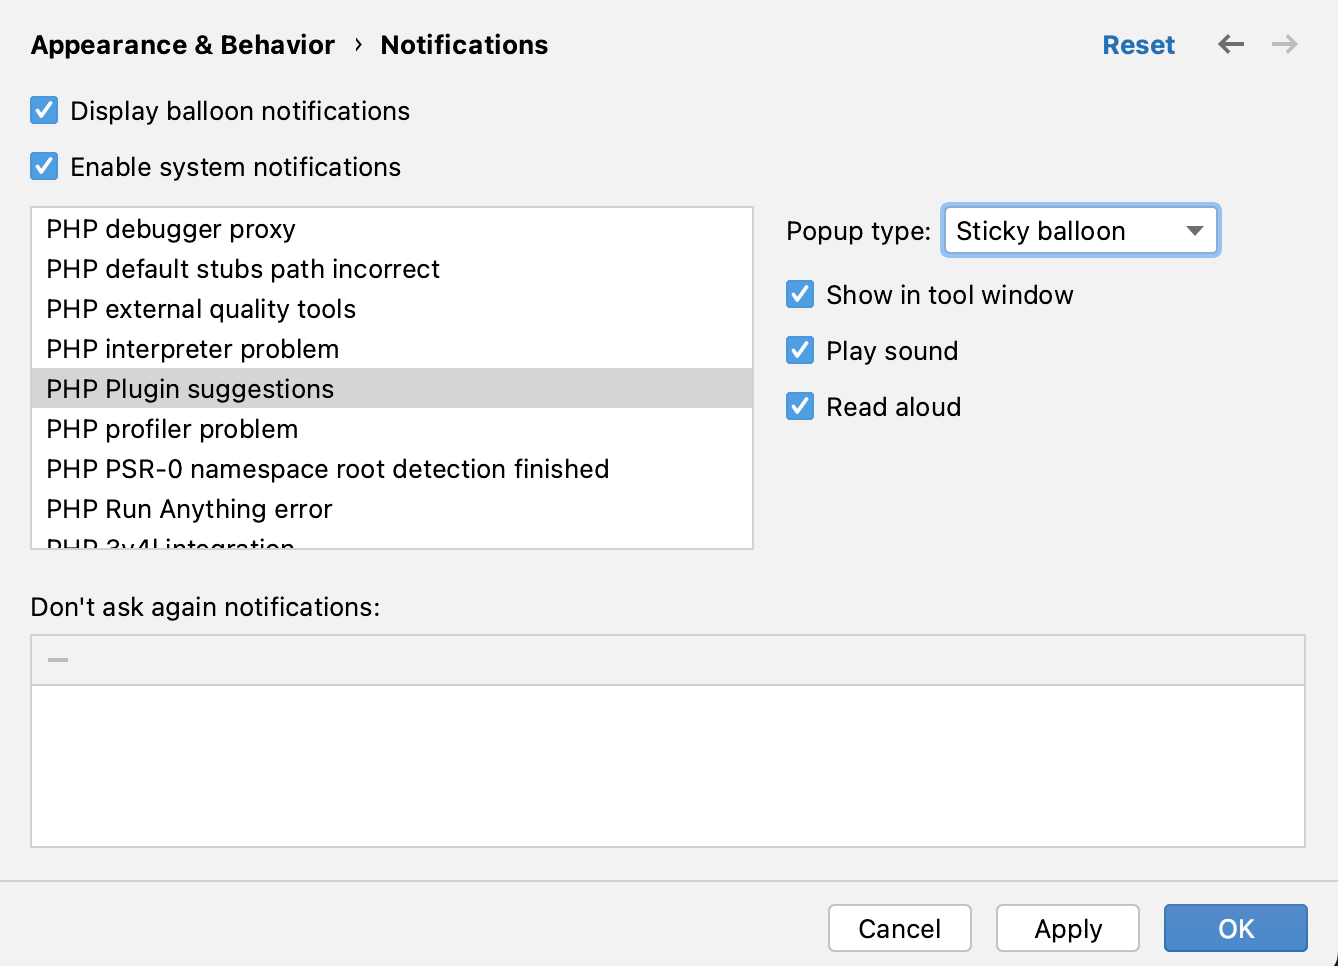 Configuring notifications settings